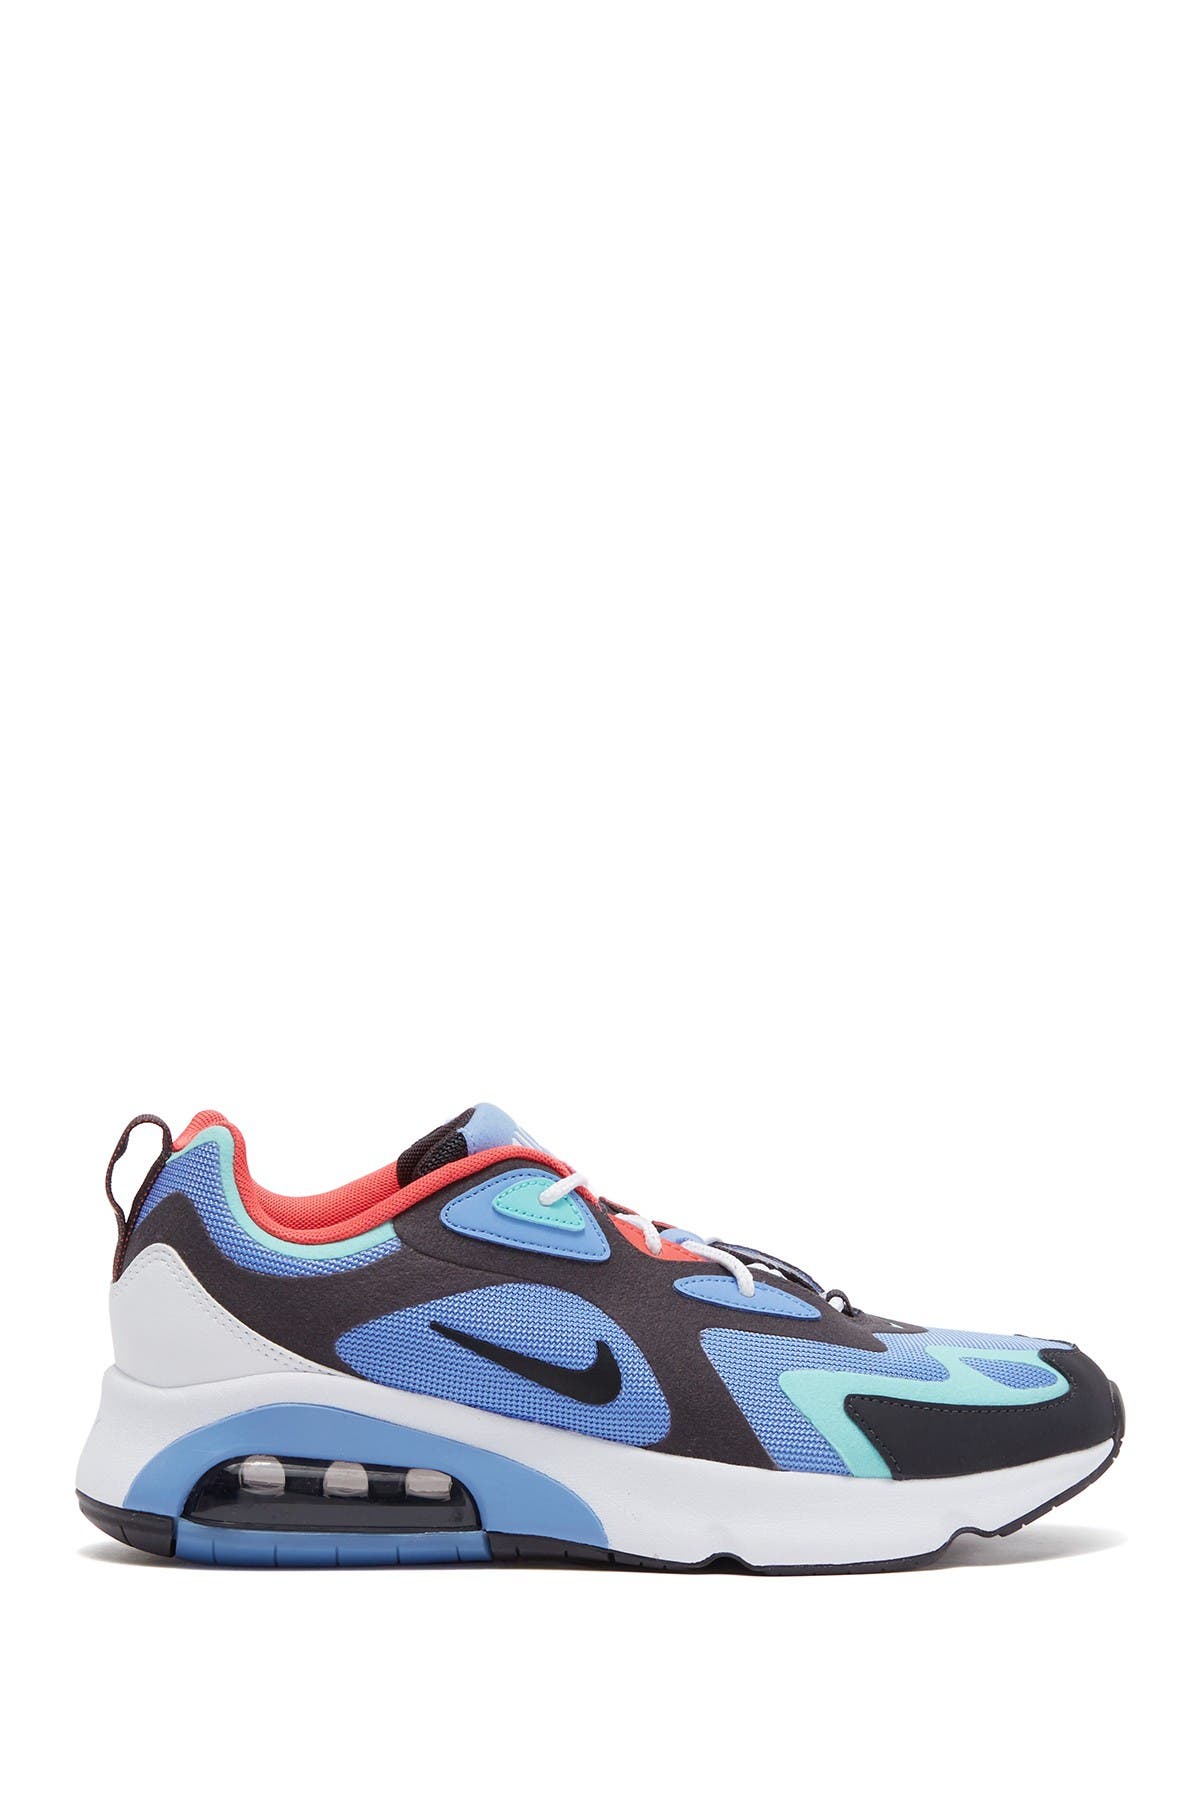 nike air max 200 world stage